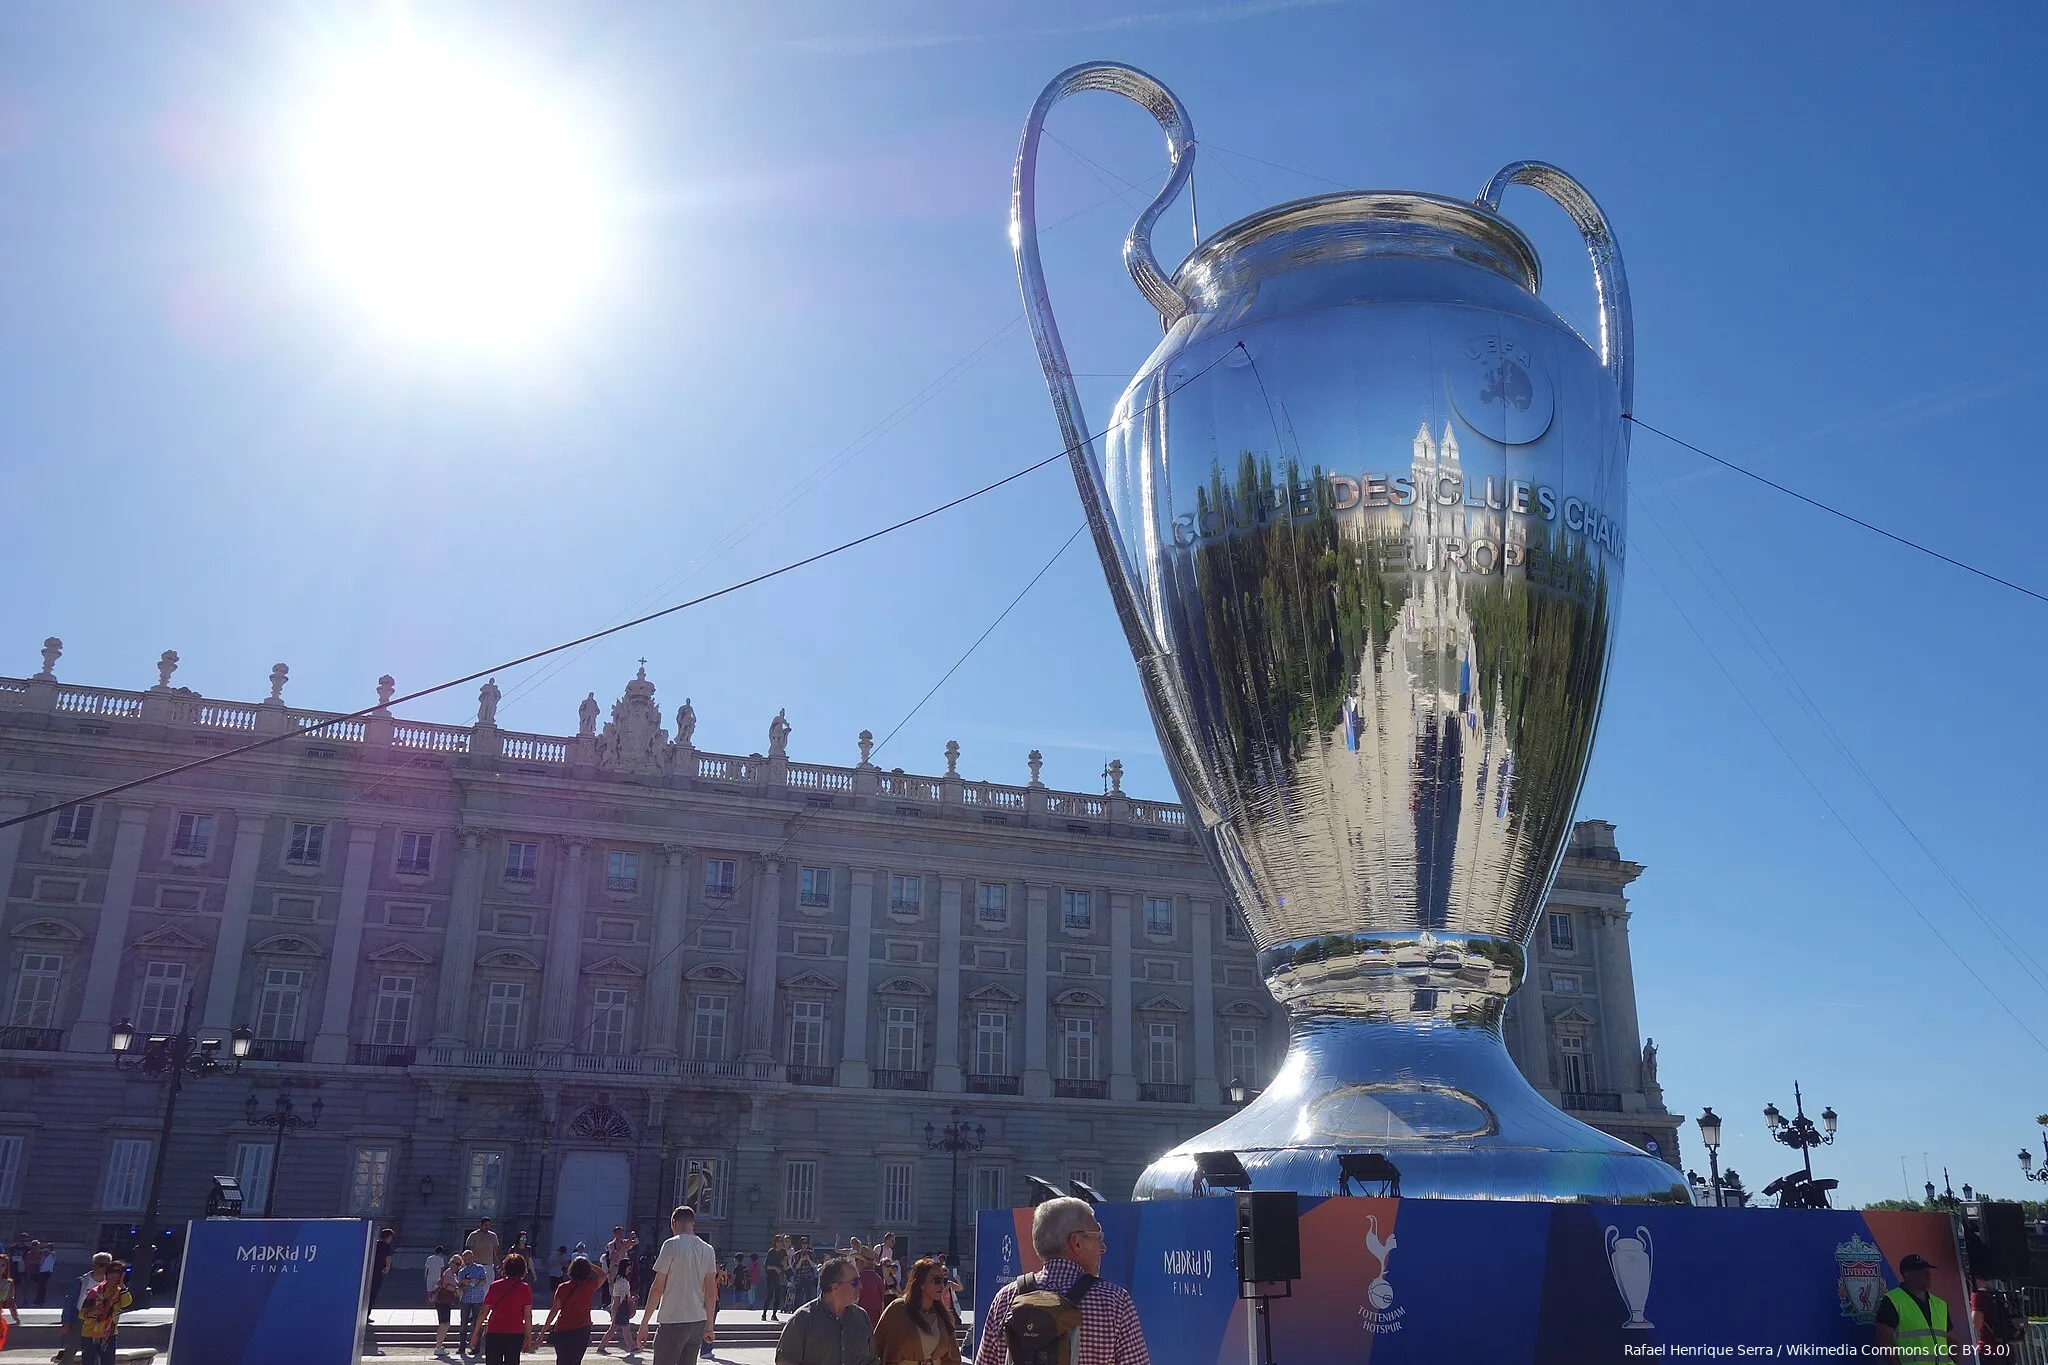 plaza del oriente with decoration related to the 2019 champions league final 3